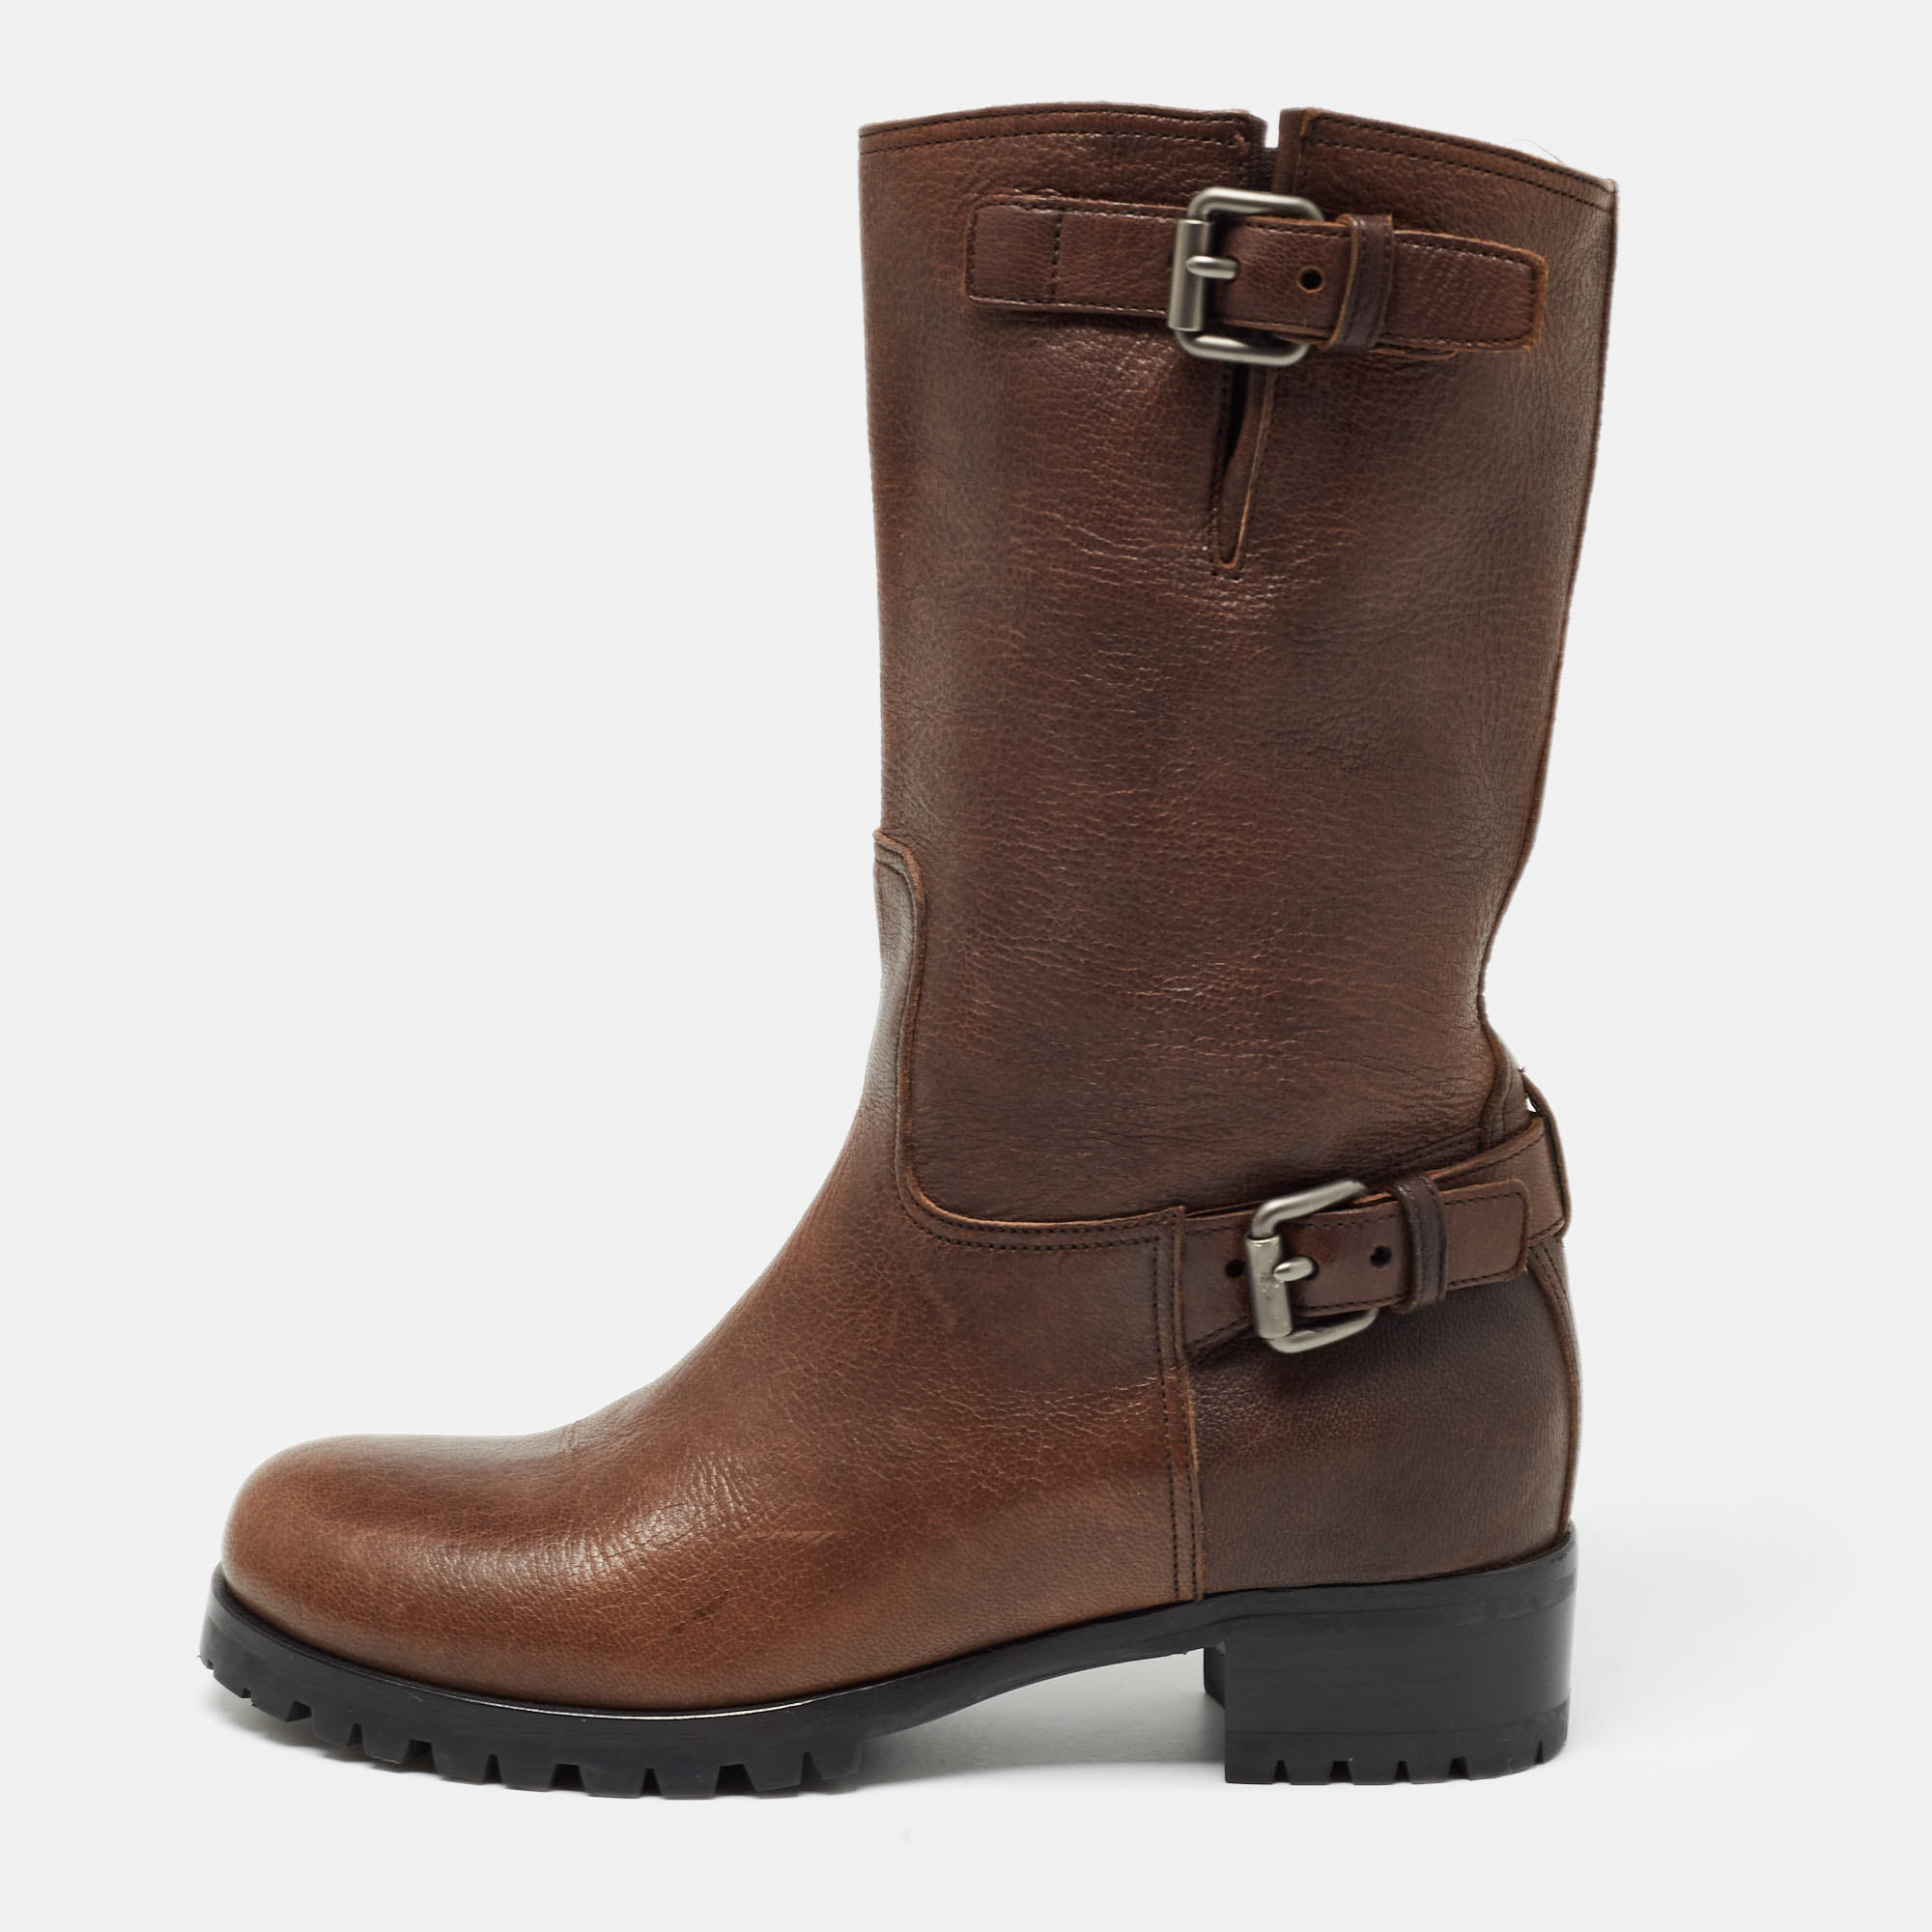 

Prada Brown Leather Buckle Detail Calf Length Boots Size